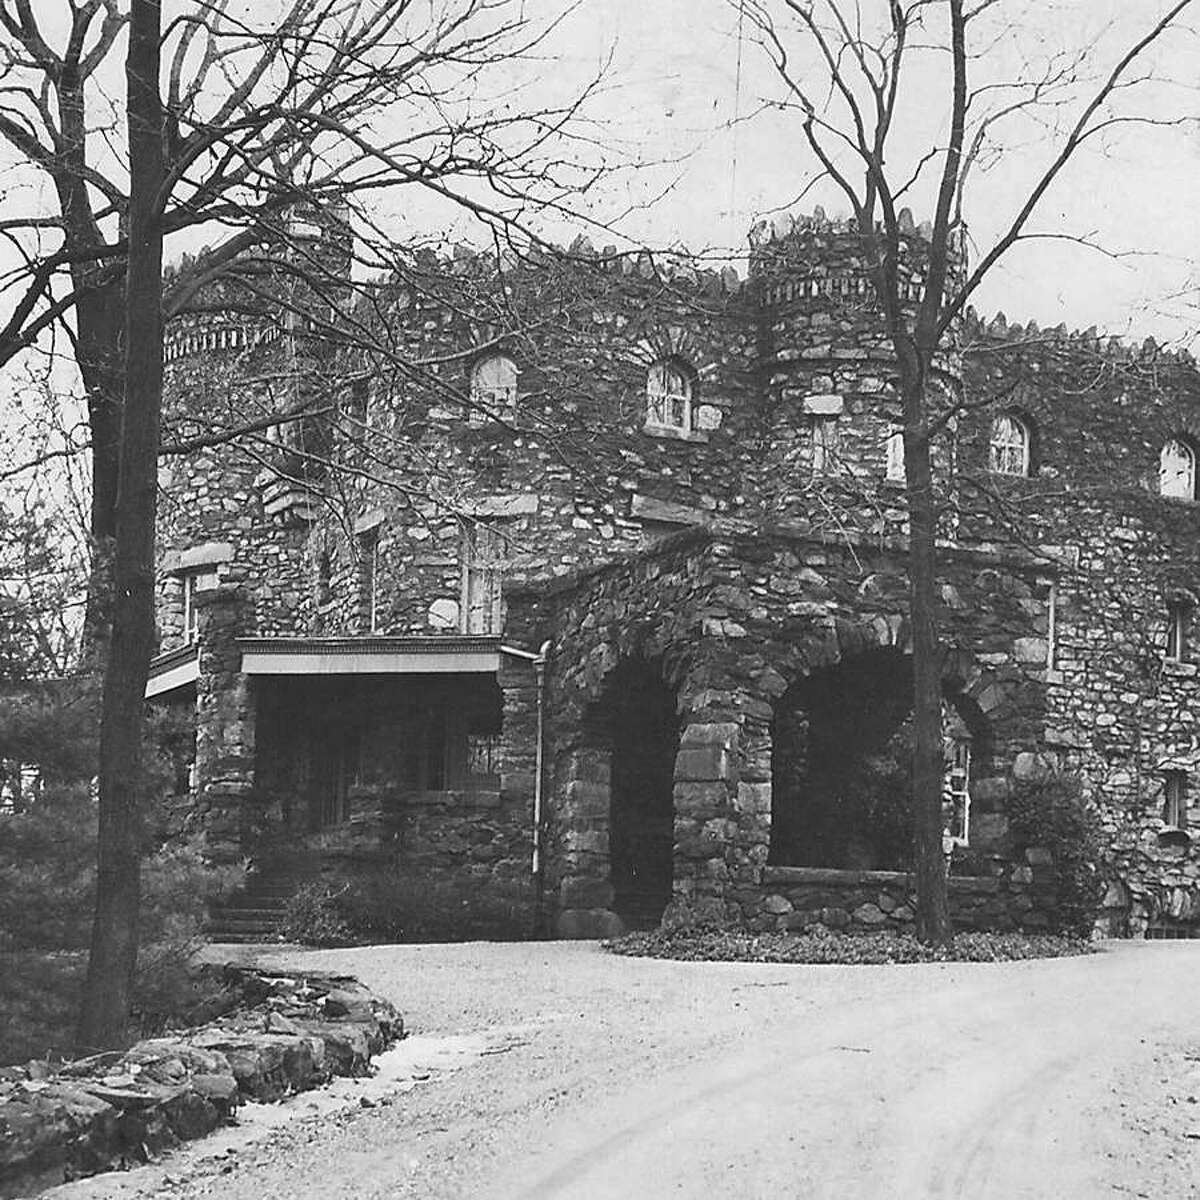 Historic Gillette Castle Photos courtesy of the National Register of Historic Places